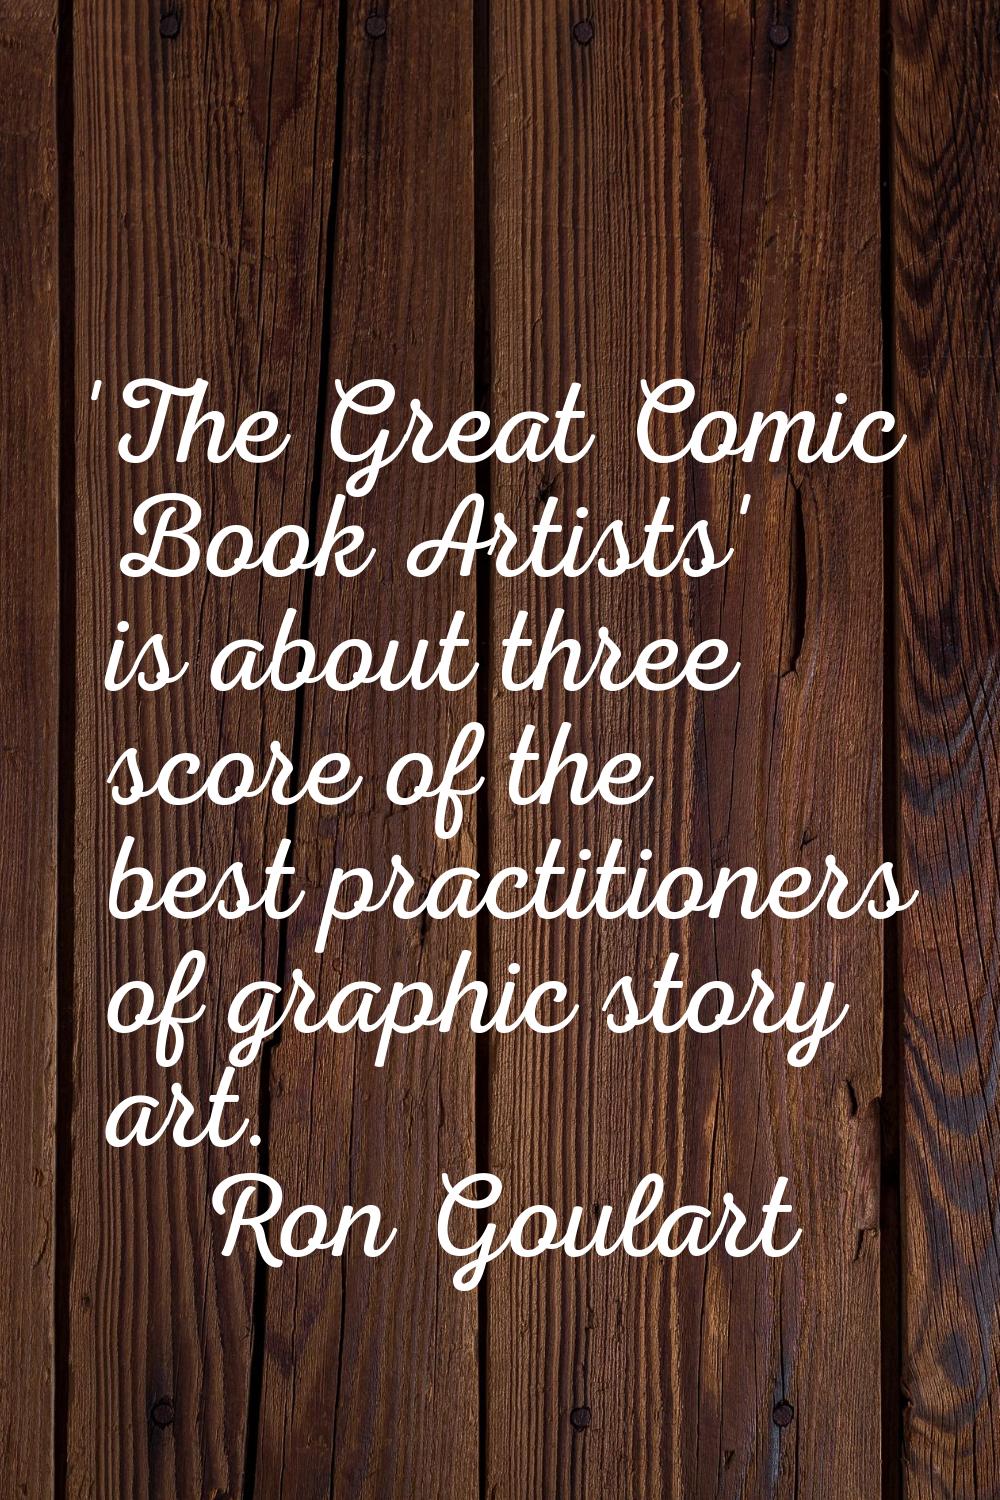 'The Great Comic Book Artists' is about three score of the best practitioners of graphic story art.